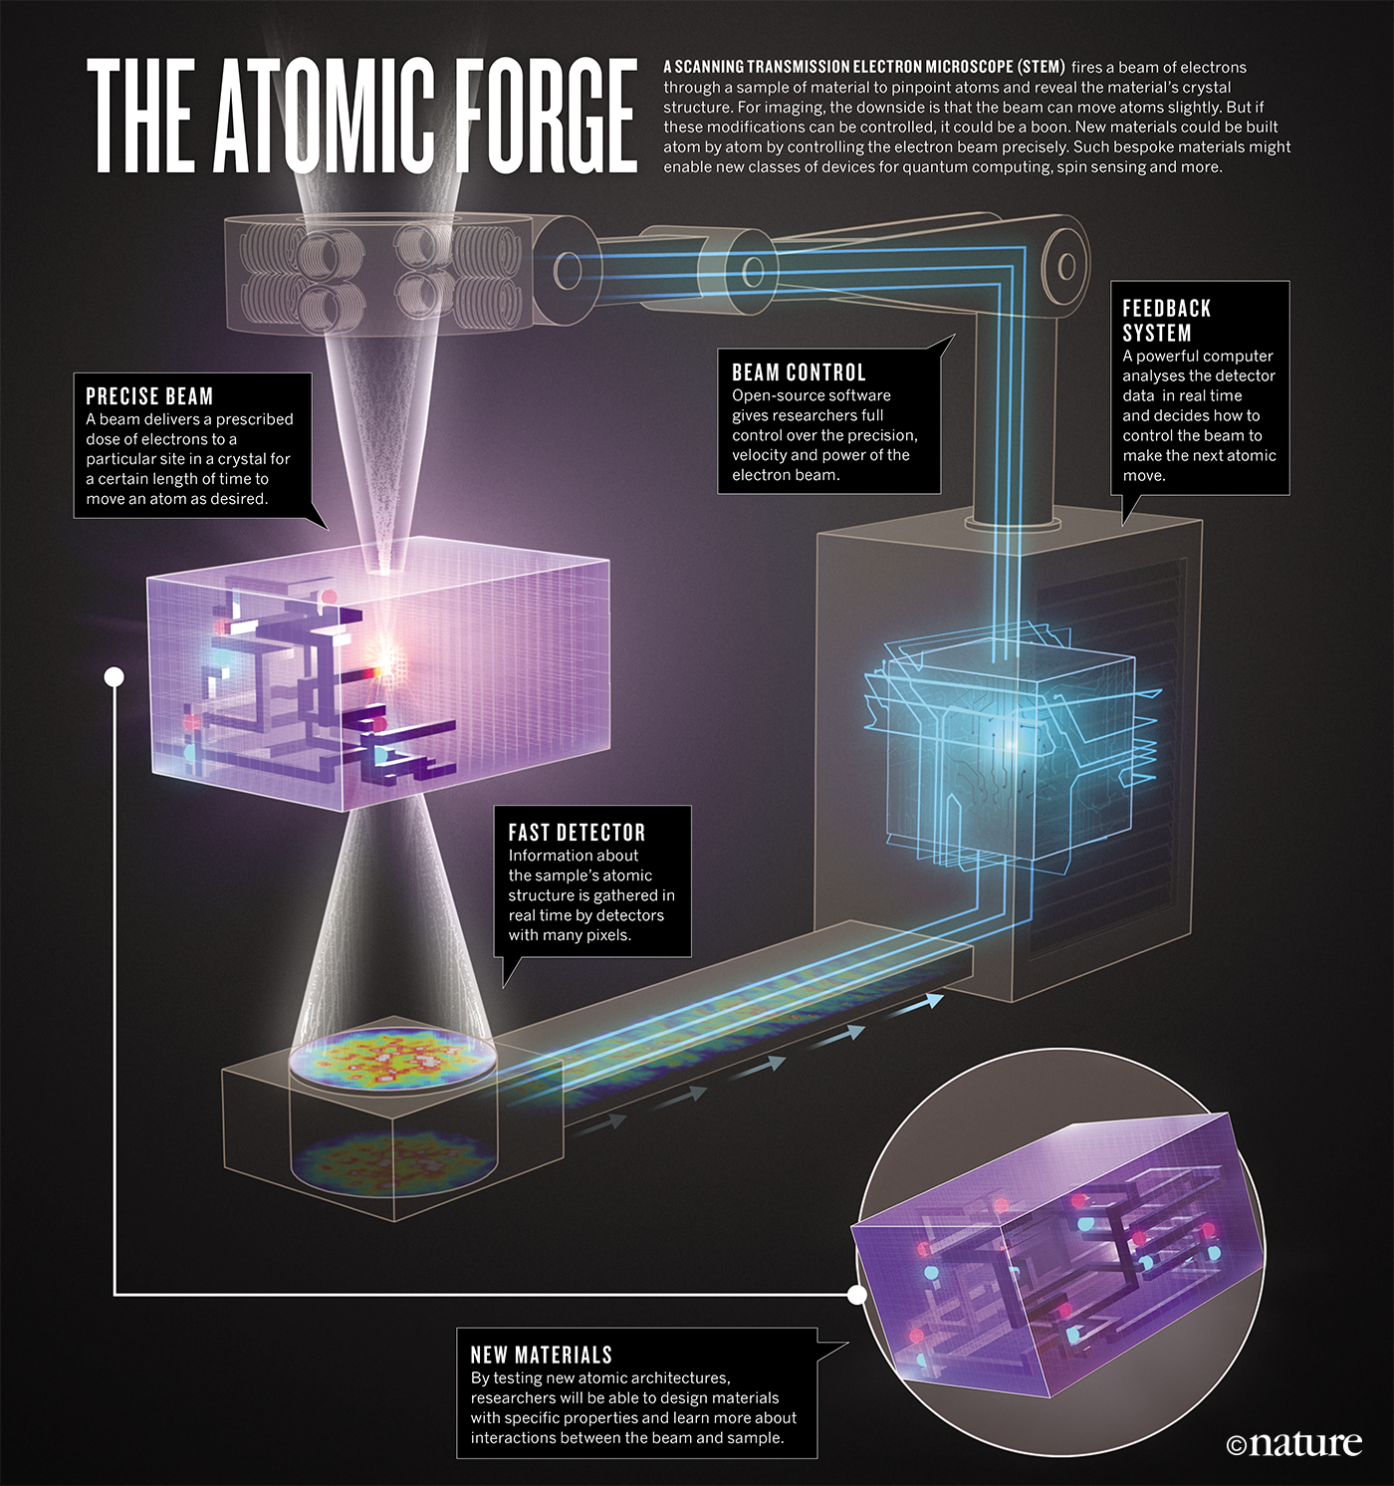 Fire up the atom forge | Nature